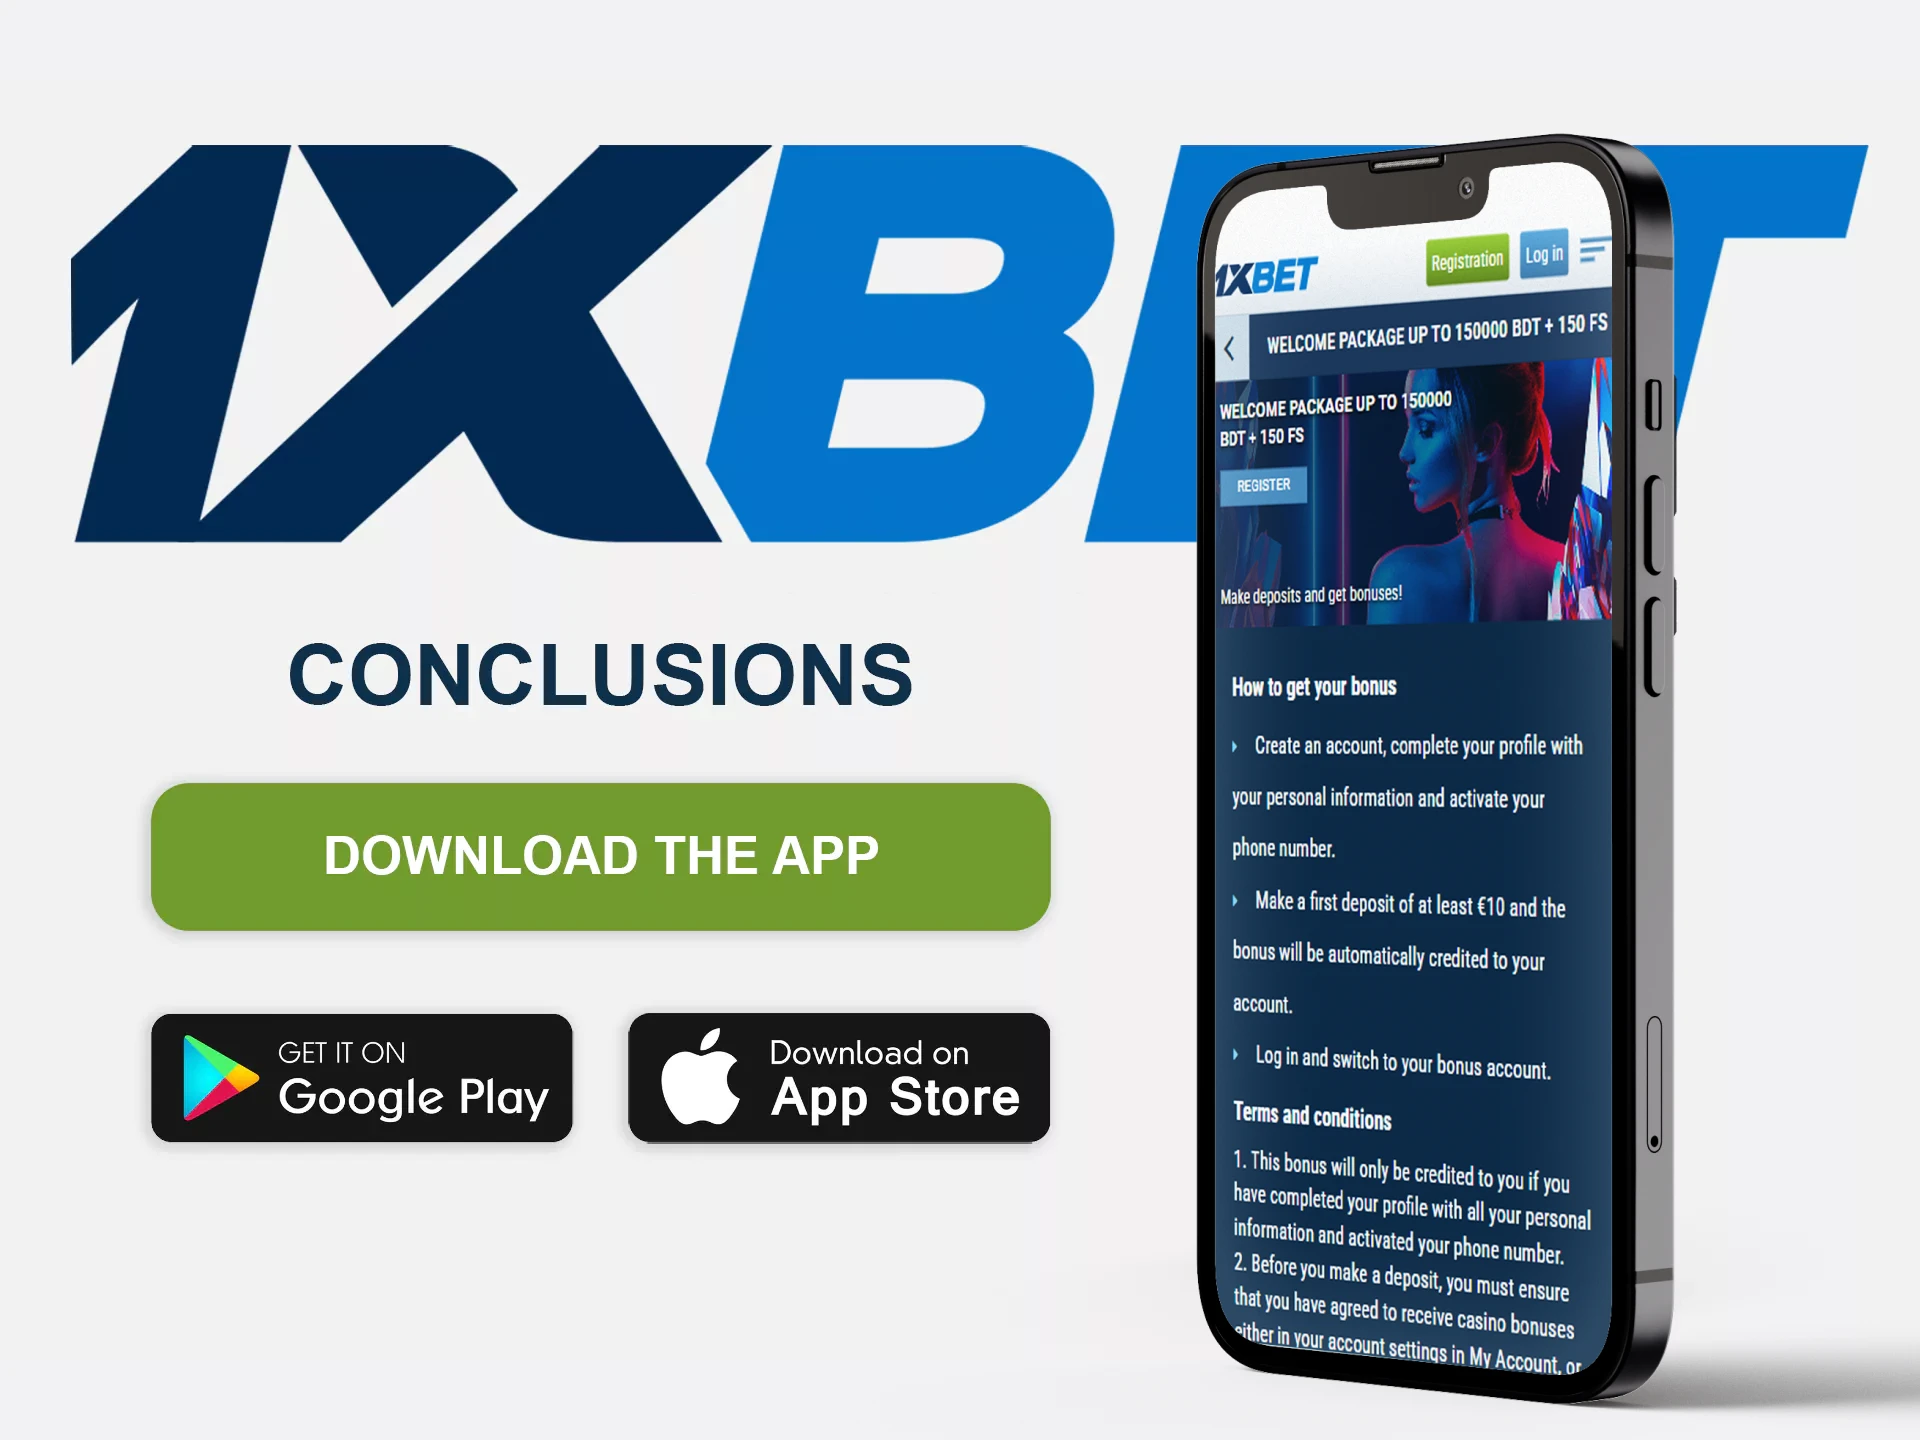 All in all, the 1xBet app deserves to be installed thanks to its great design and perfect possibilities.